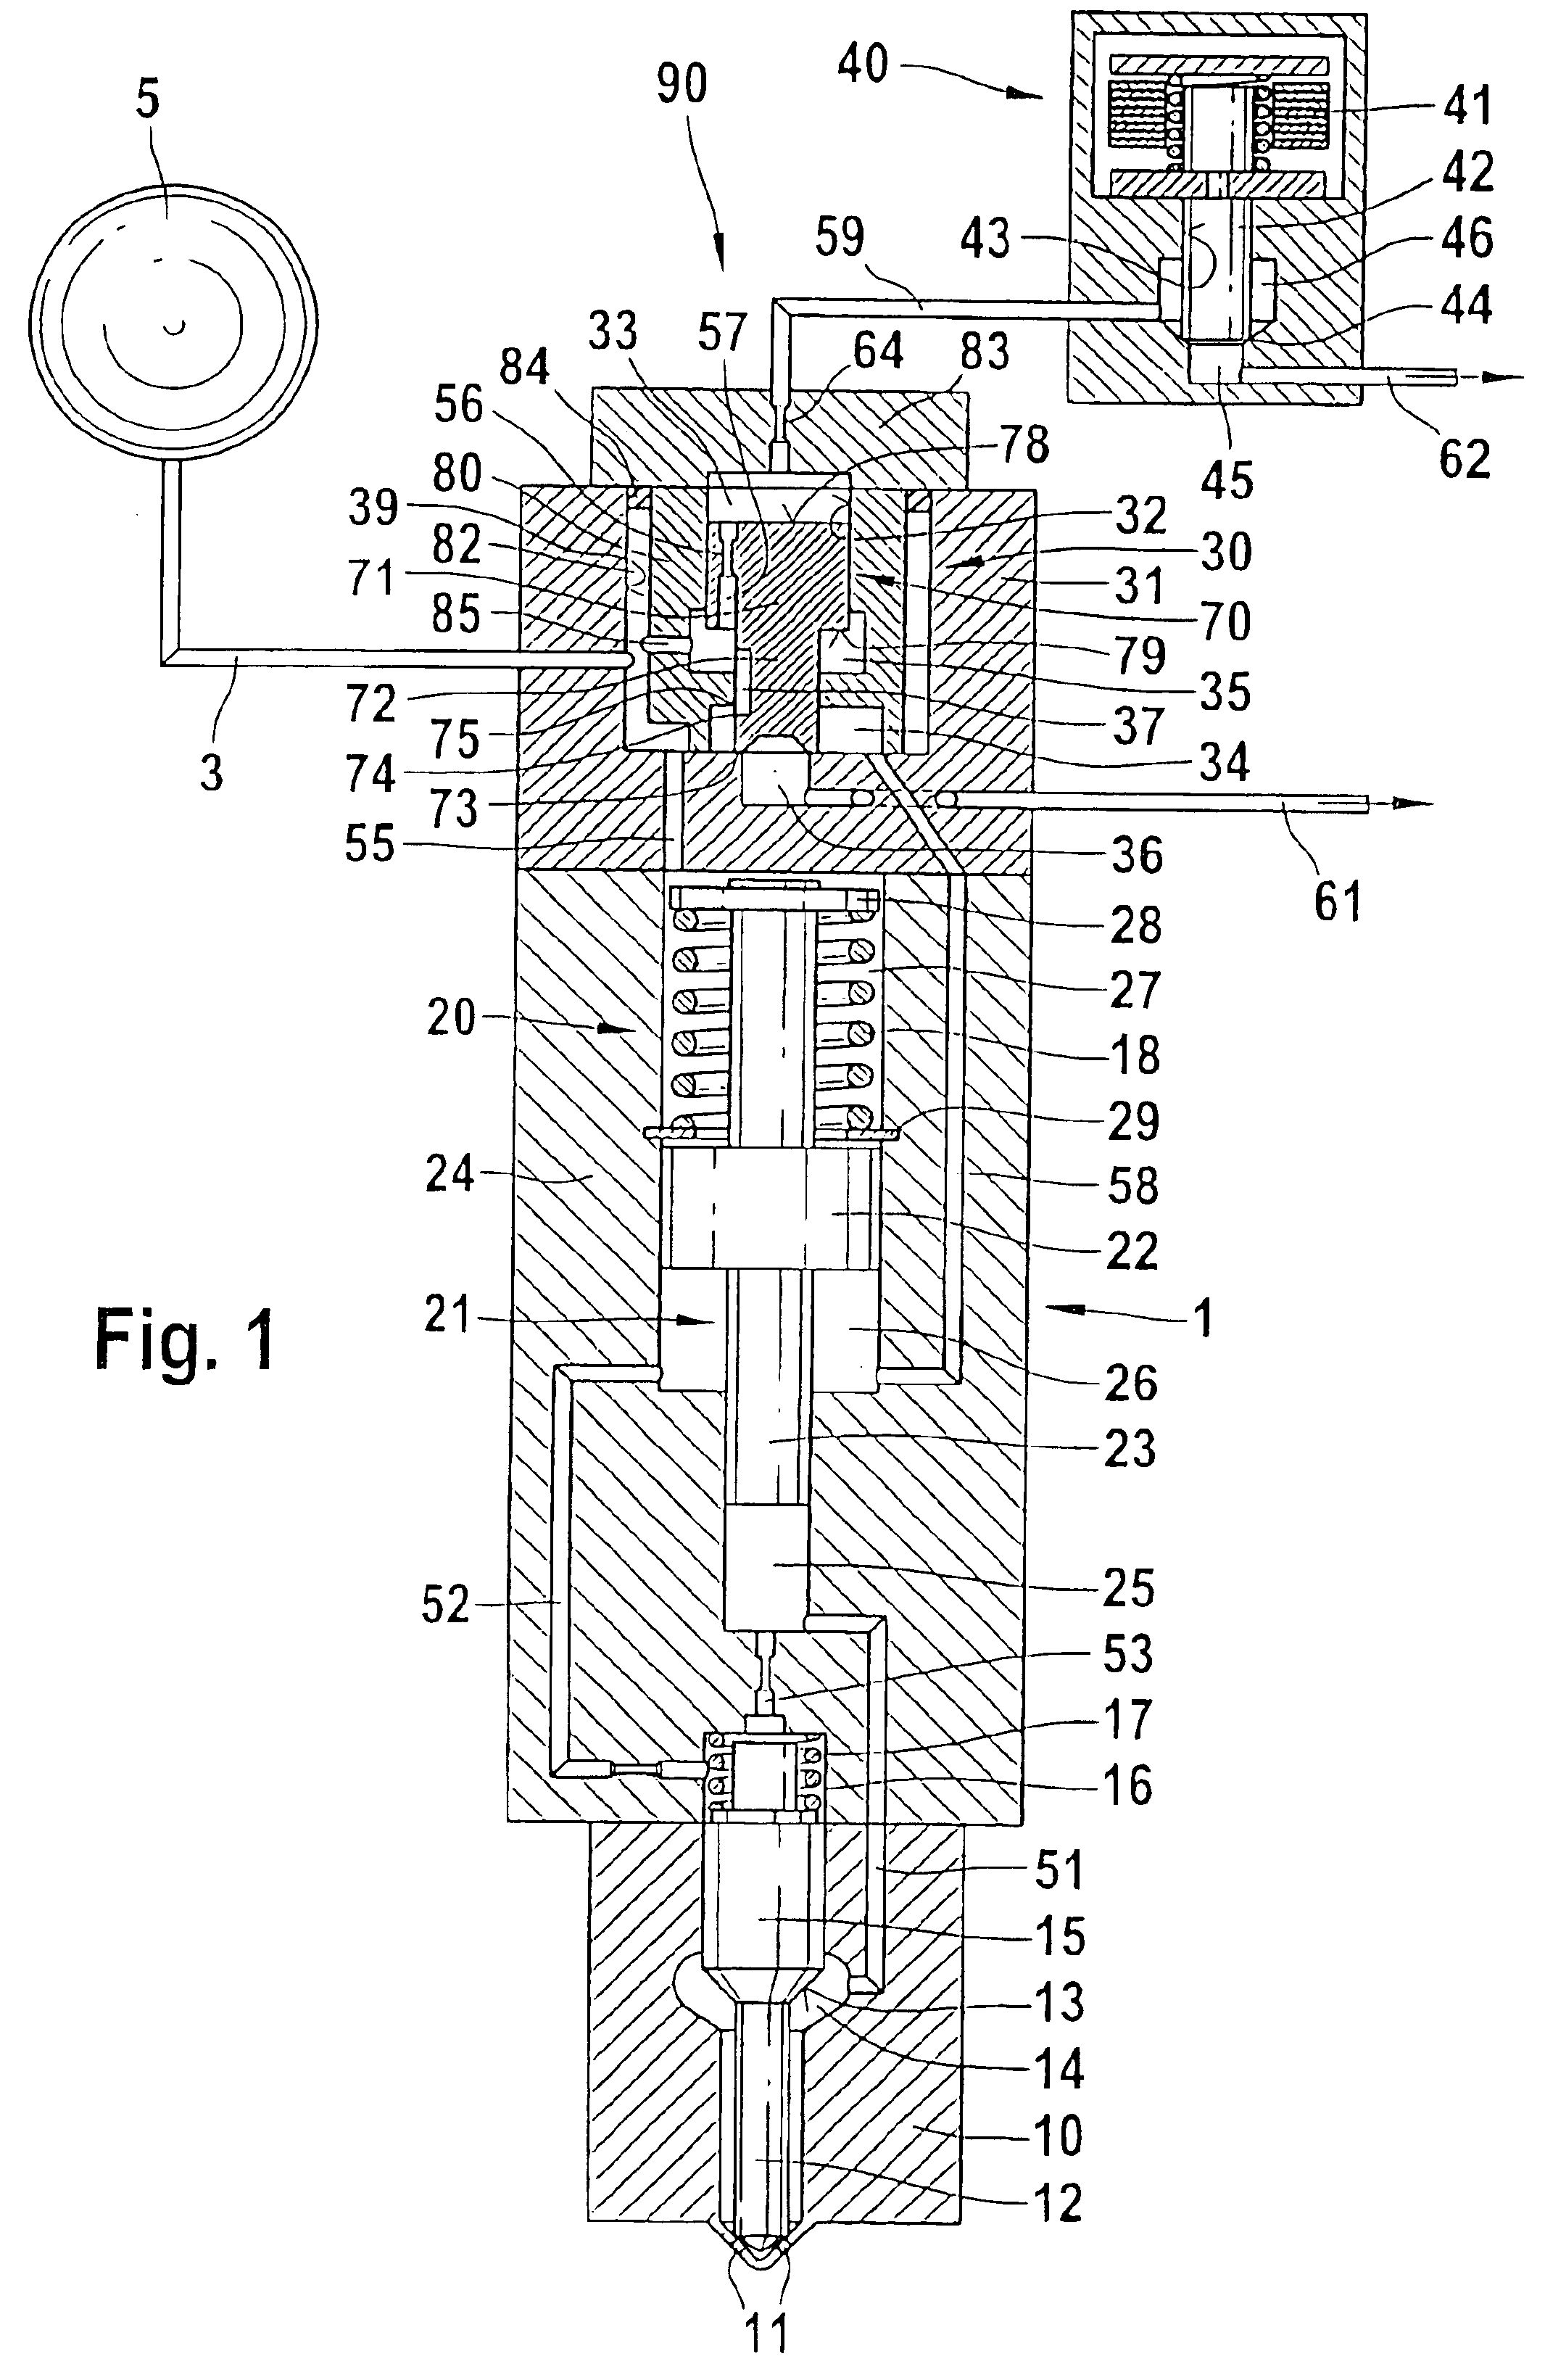 Fuel injection system for internal combustion engines